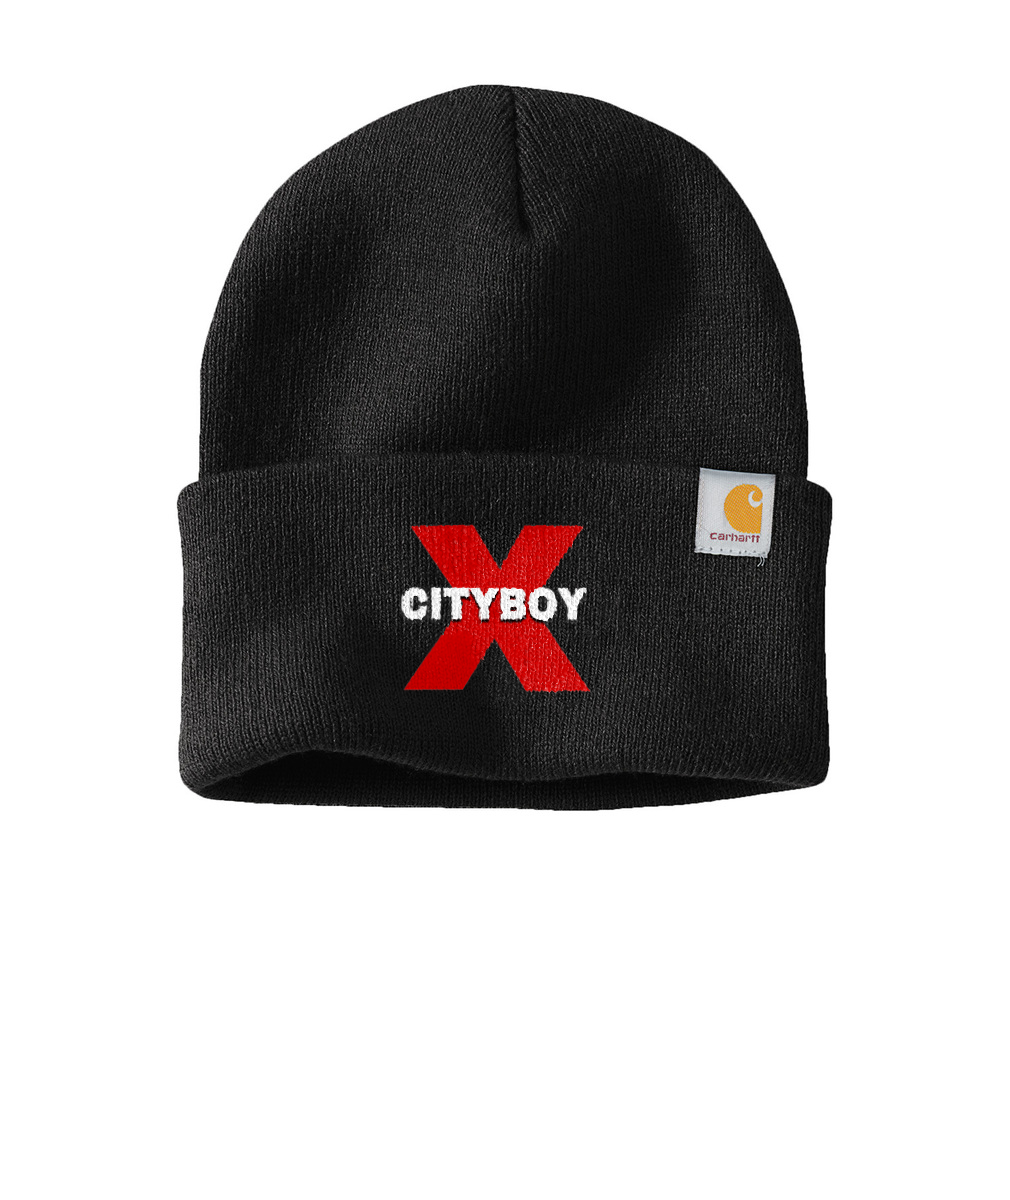 CITYBOY print Carhartt® Embroidered Watch Cap 2.0 or Similar